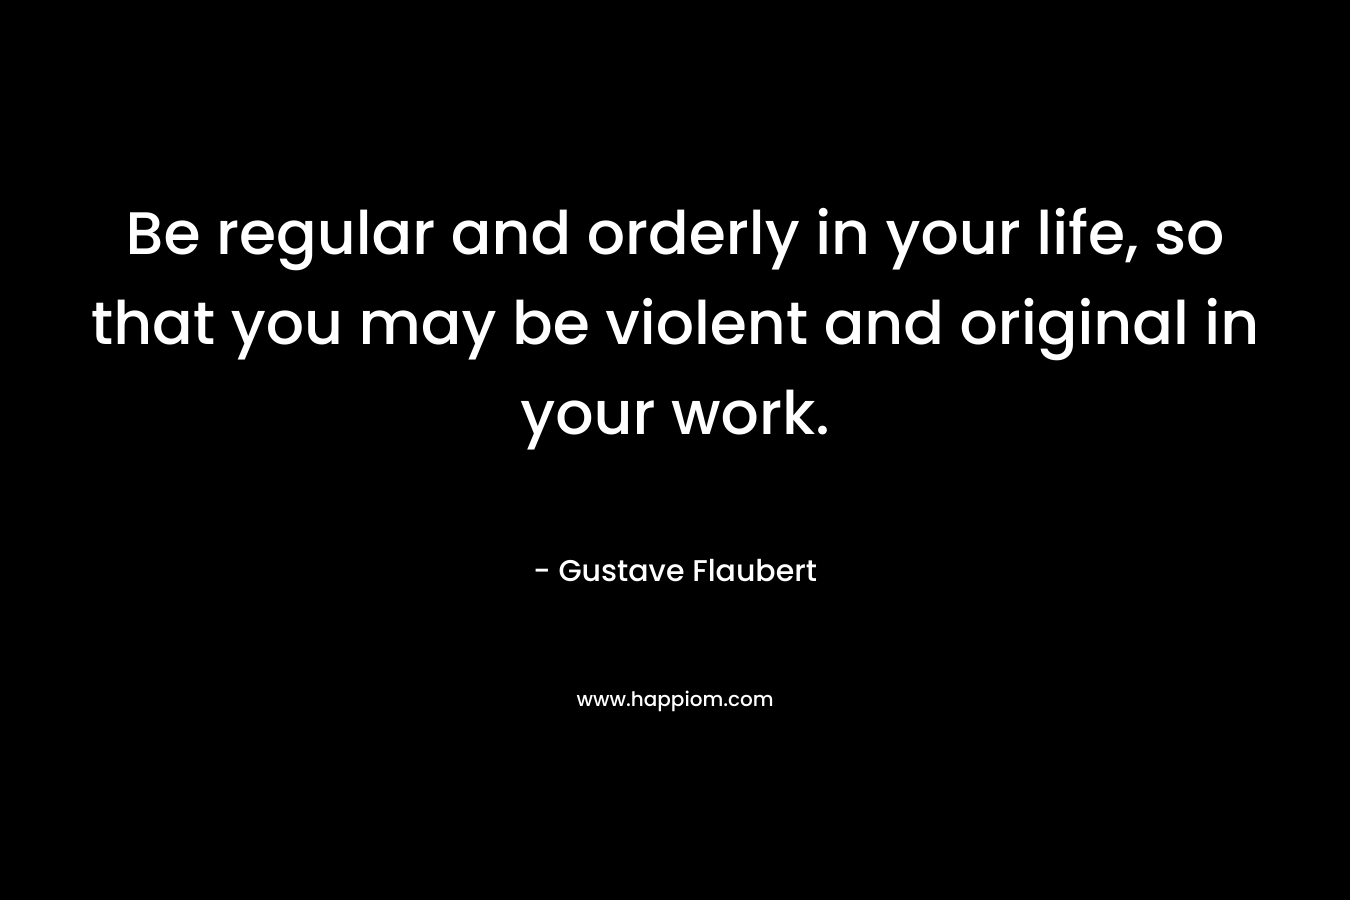 Be regular and orderly in your life, so that you may be violent and original in your work. – Gustave Flaubert